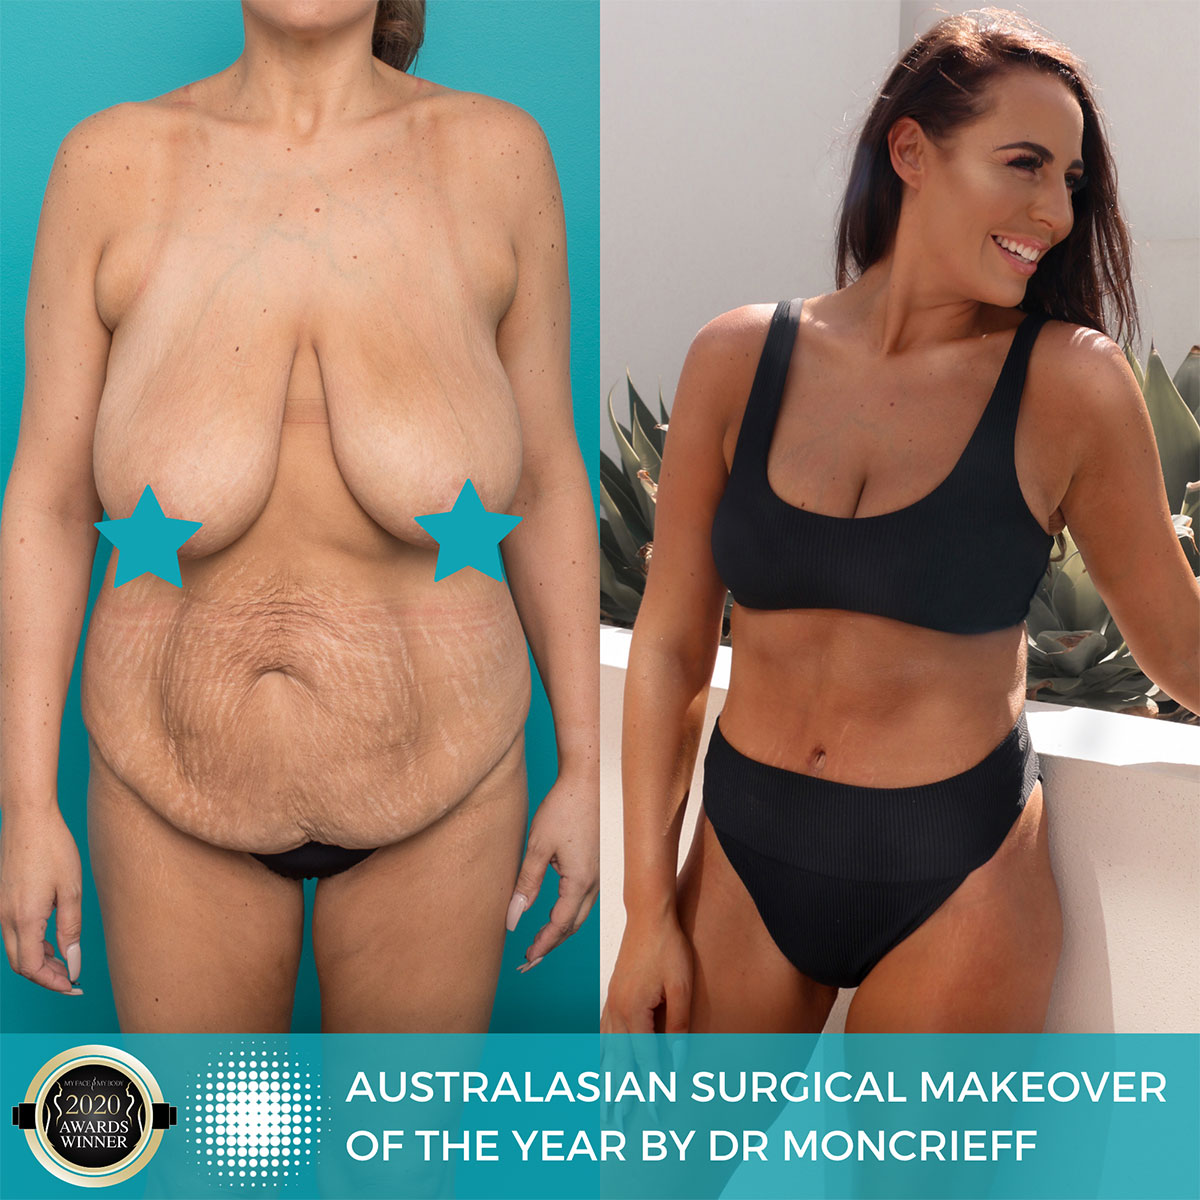 AustralAsian Surgical Makeover of the Year by Dr Moncrieff